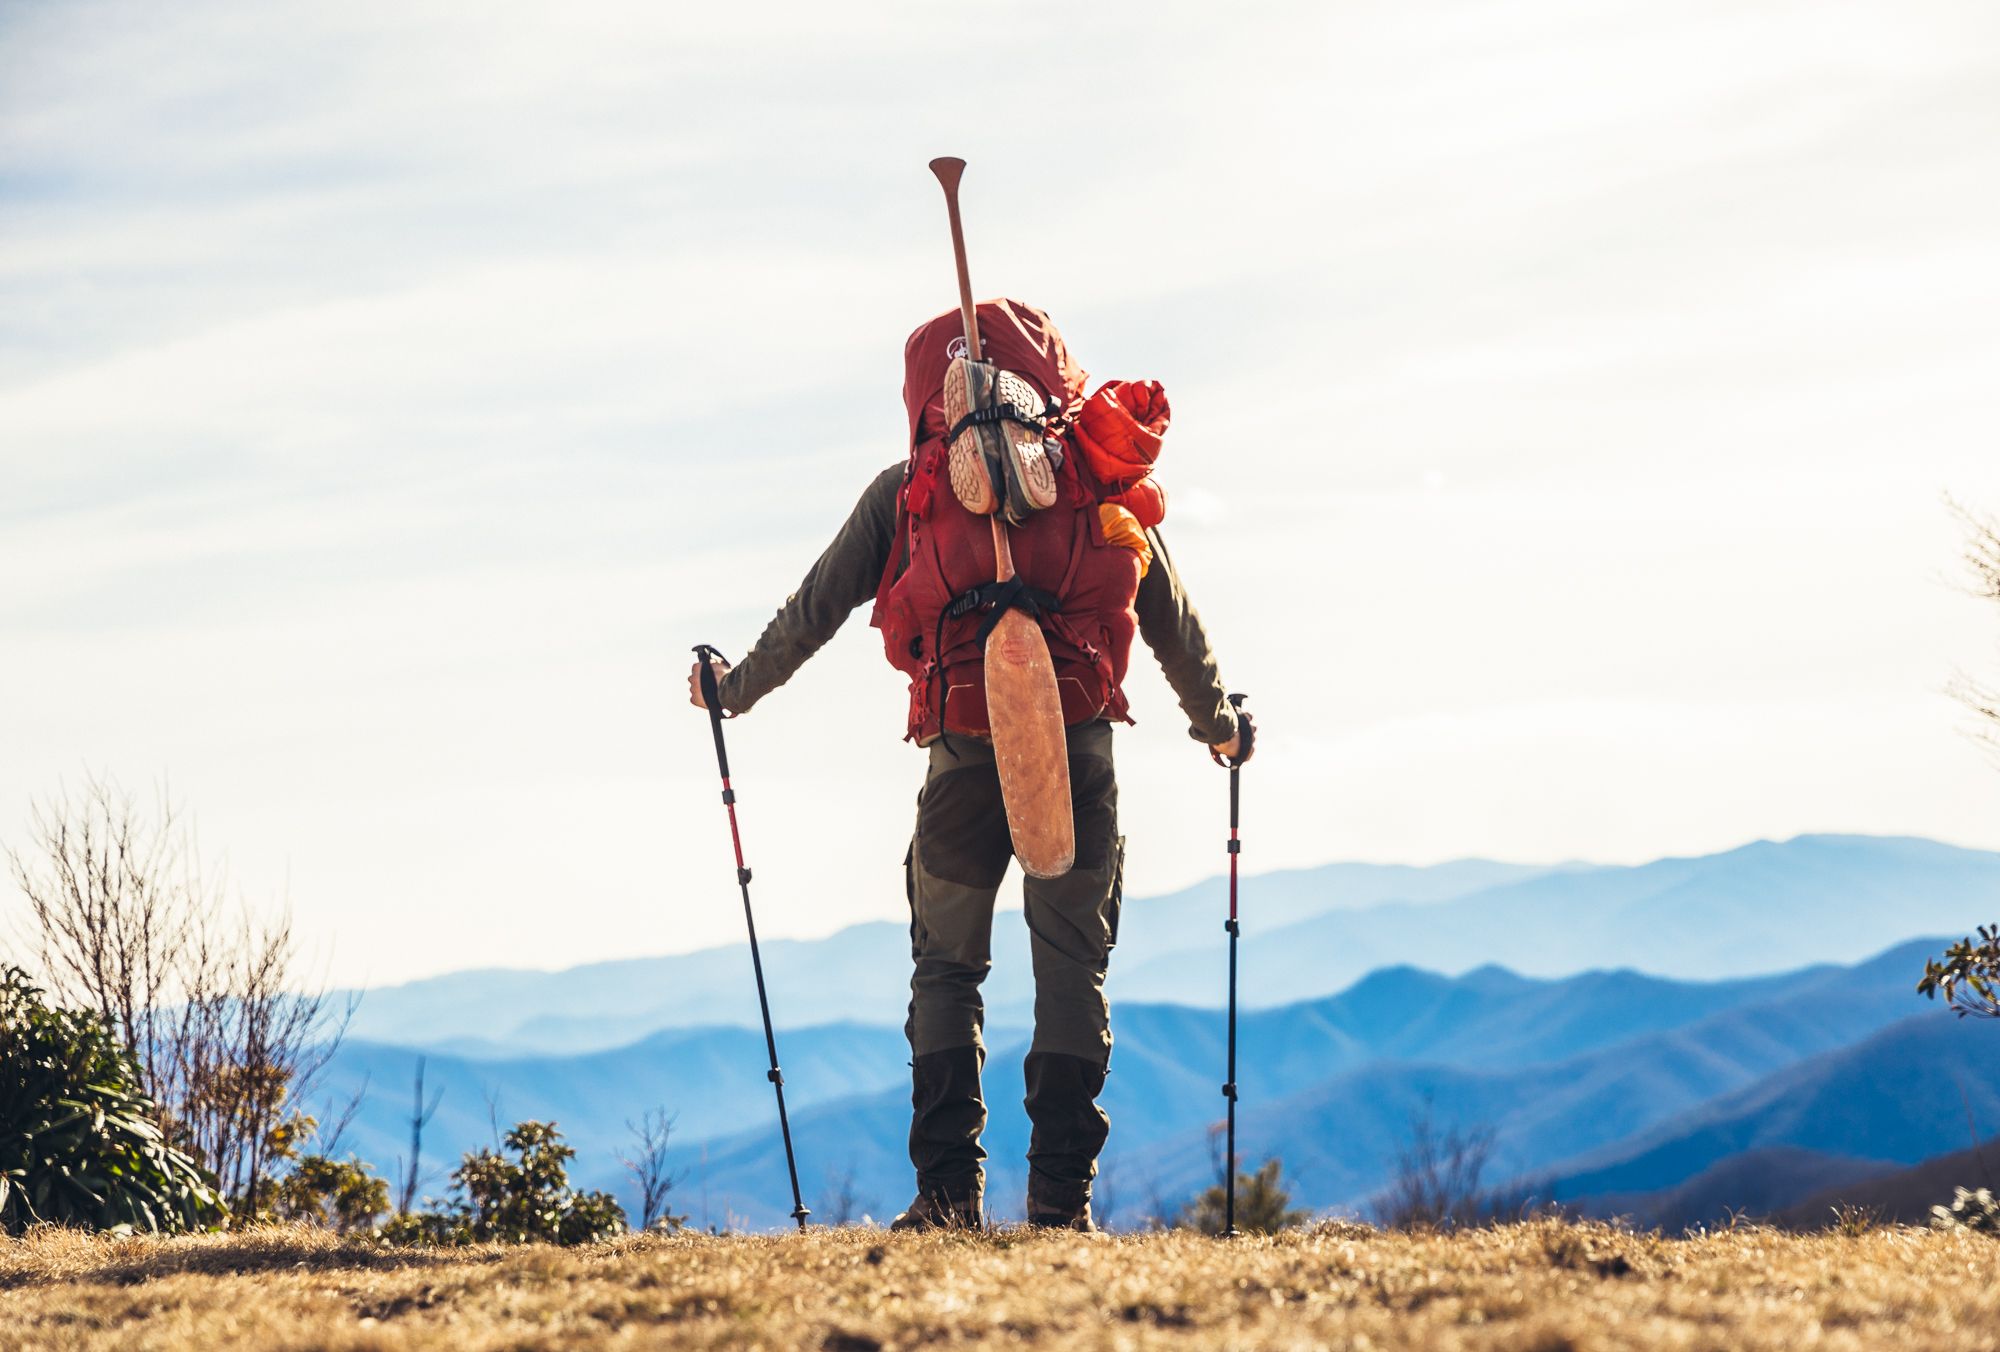 Hiker facing towards the mountains. A full backpack has an oar and shoes strapped to the back.